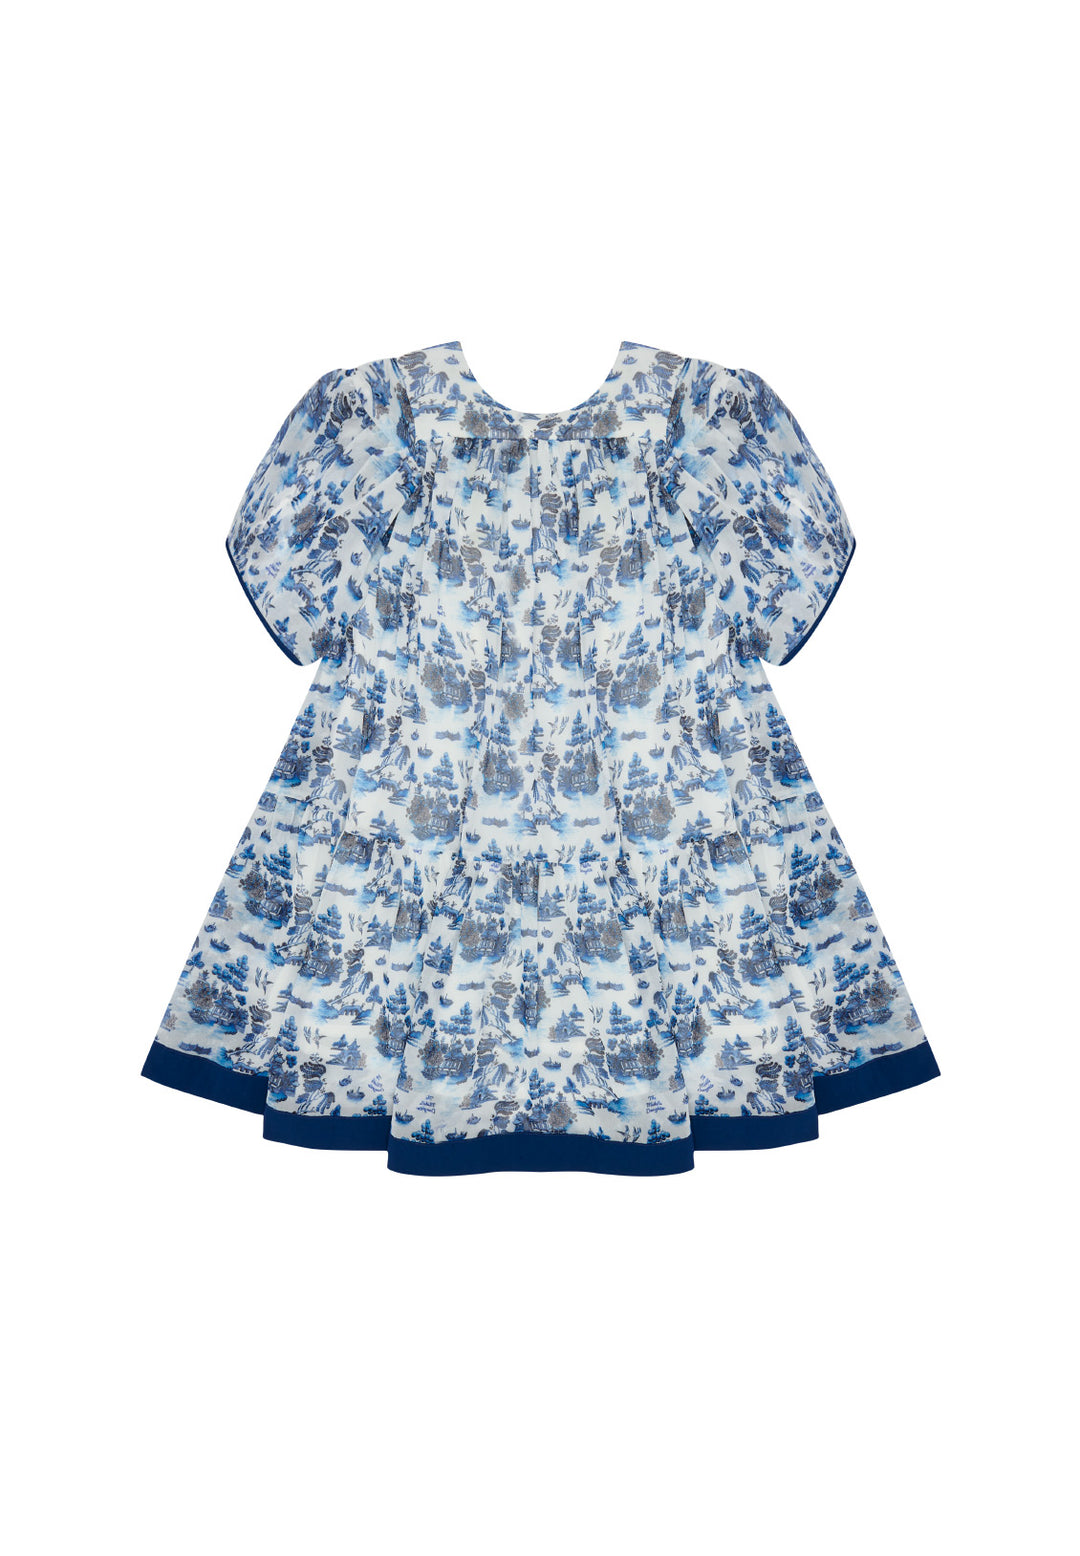 FLOAT YOUR BOAT DRESS-WILLOW PATTERN